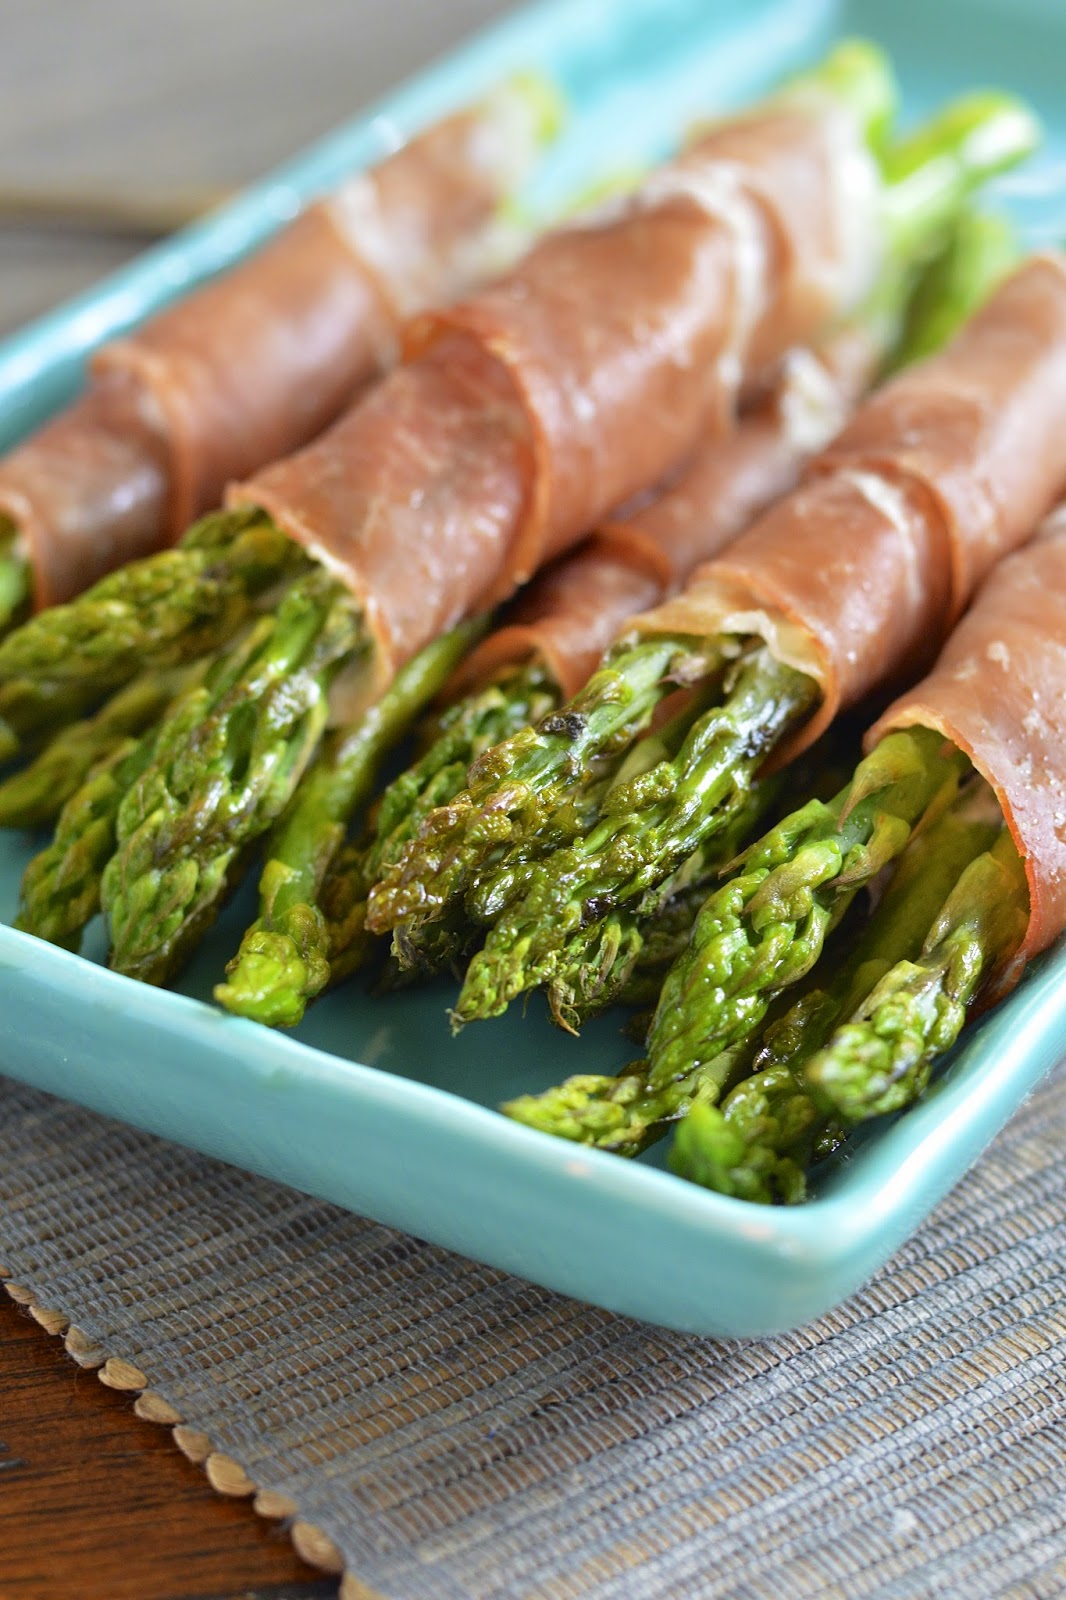 Bundles of asparagus wrapped in prosciutto, creamy goat cheese and a touch of garlic.